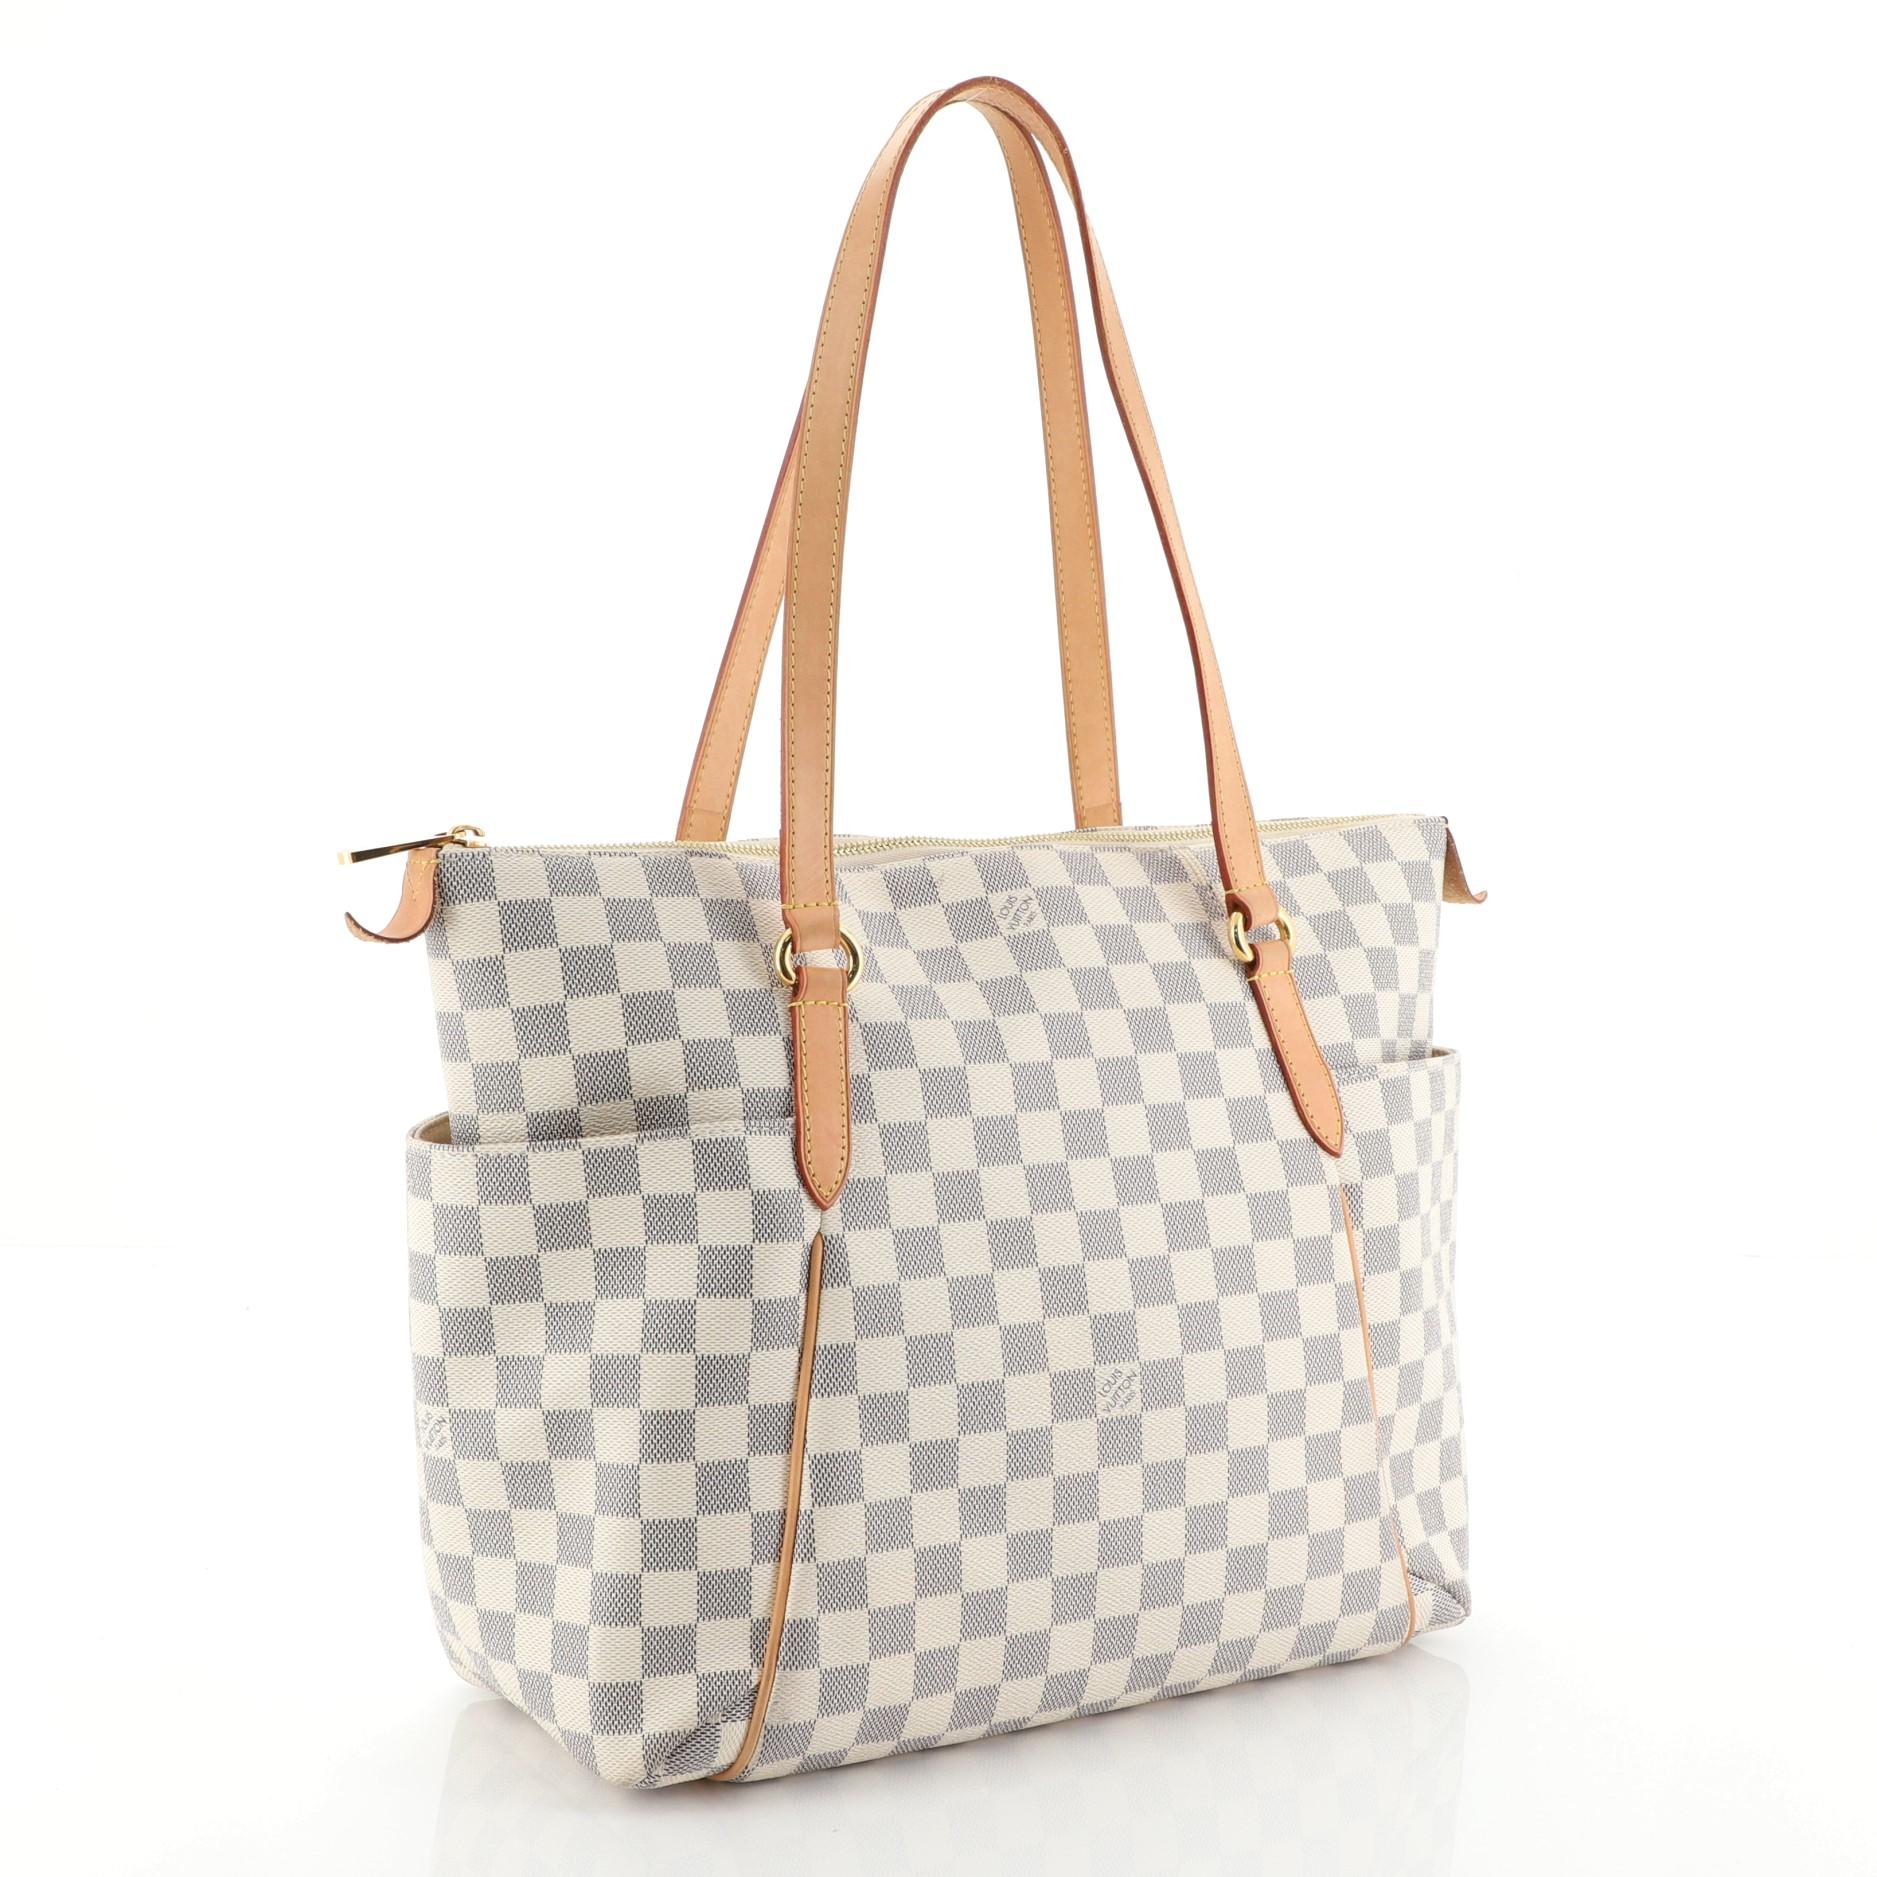 This Louis Vuitton Totally Handbag Damier MM, crafted from damier azur coated canvas, features dual leather handles and trim, two exterior lateral pockets, and gold-tone hardware. Its top zip closure opens to a neutral fabric interior with slip